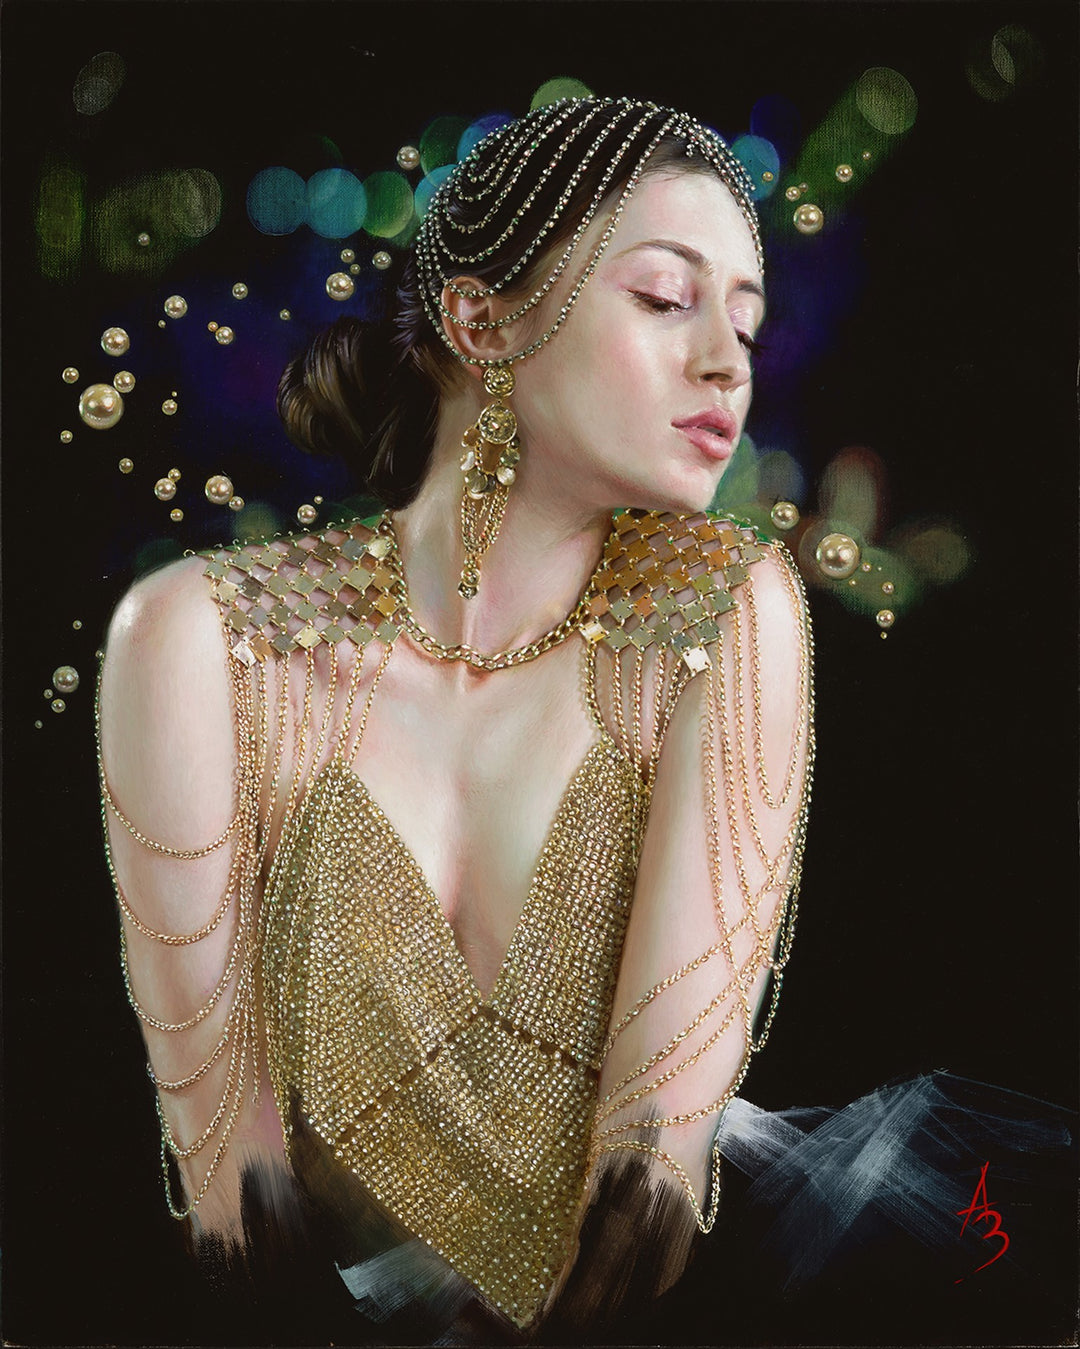 An Alexandra Manukyan - "Effulgent" oil painting on linen depicting a woman in a gold dress.